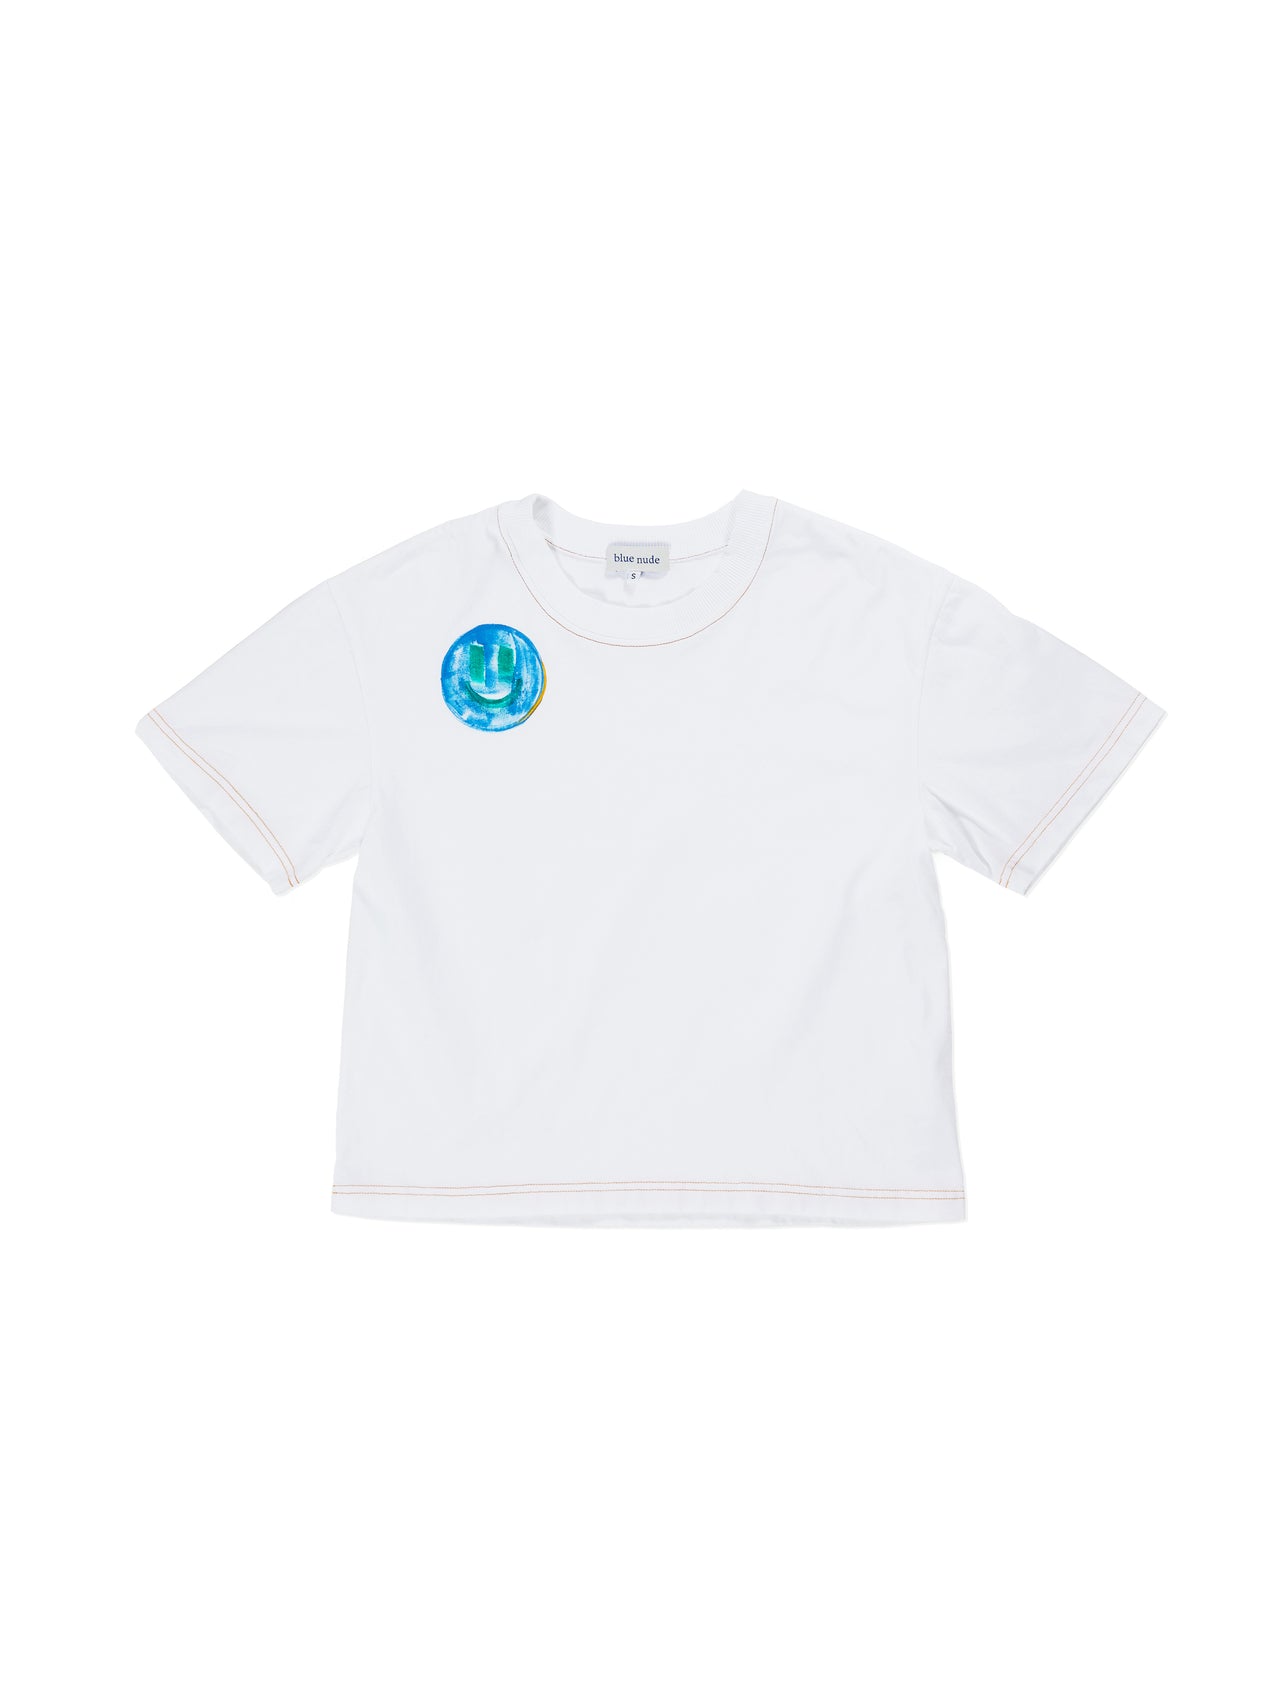 BLUE NUDE - ROSWELL HAND PAINTED SMILEY T-SHIRT